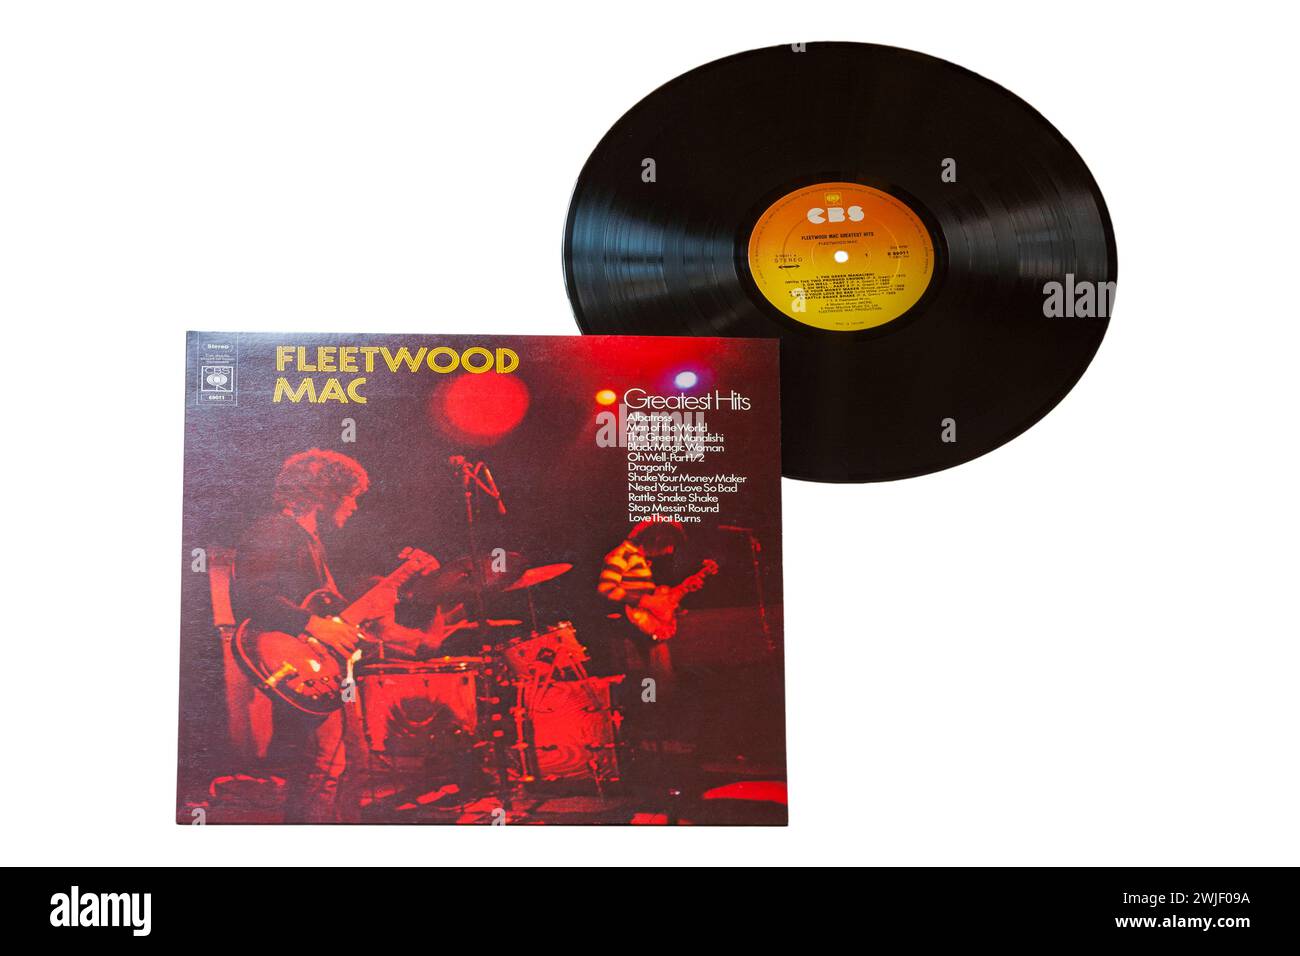 Fleetwood Mac Greatest Hits vinyl record album LP cover isolated on white background - 1971 Stock Photo